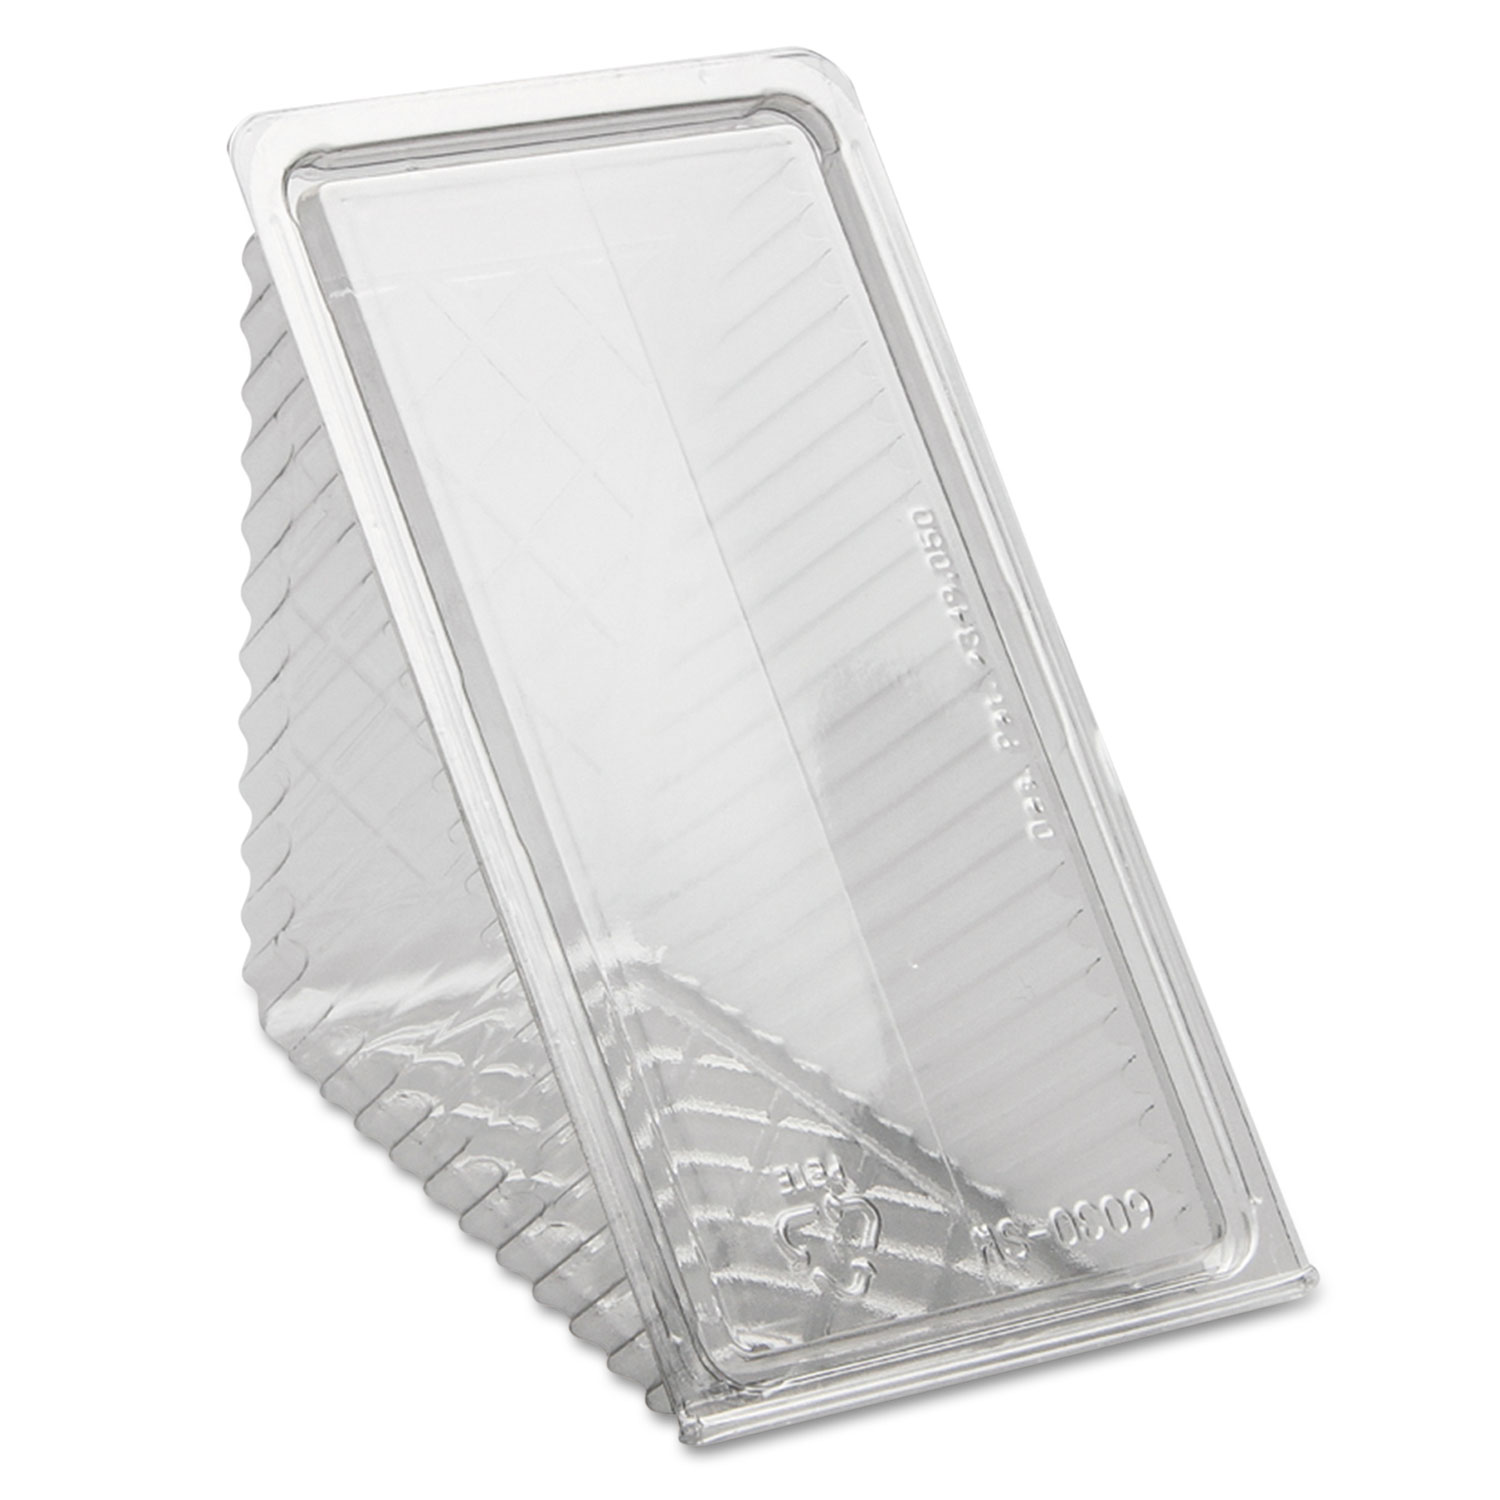  Pactiv Y11334 Hinged Lid Sandwich Wedges, Plastic, Clear, 6 1/2 x 3 x 3 1/4, 85/PK, 3 PK/CT (PCTY11334) 